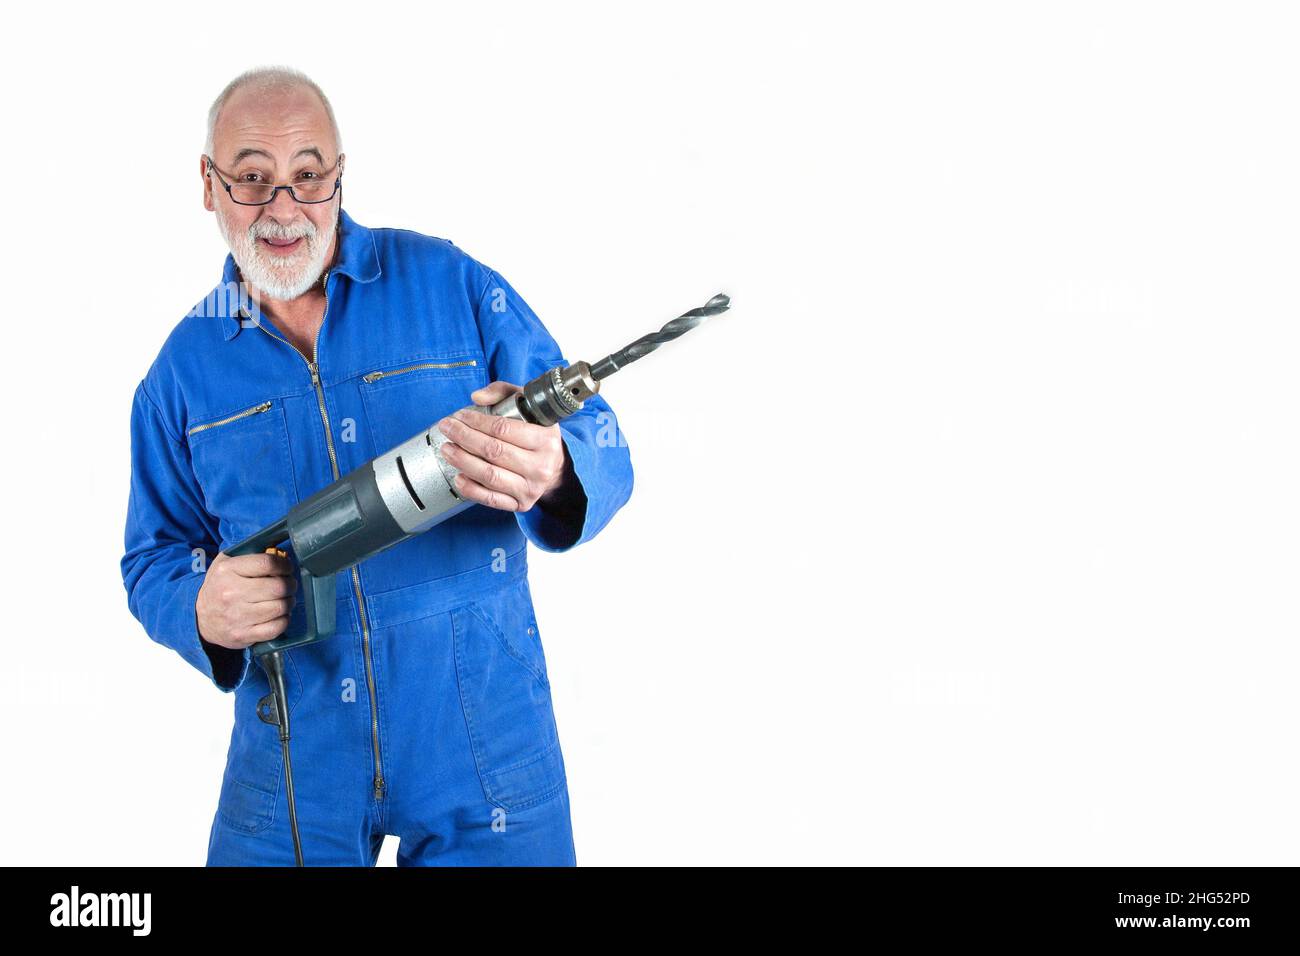 Dynamic, older craftsman with a great deal of professional experience holds his drilling machine with a thick drill in his hands. Stock Photo